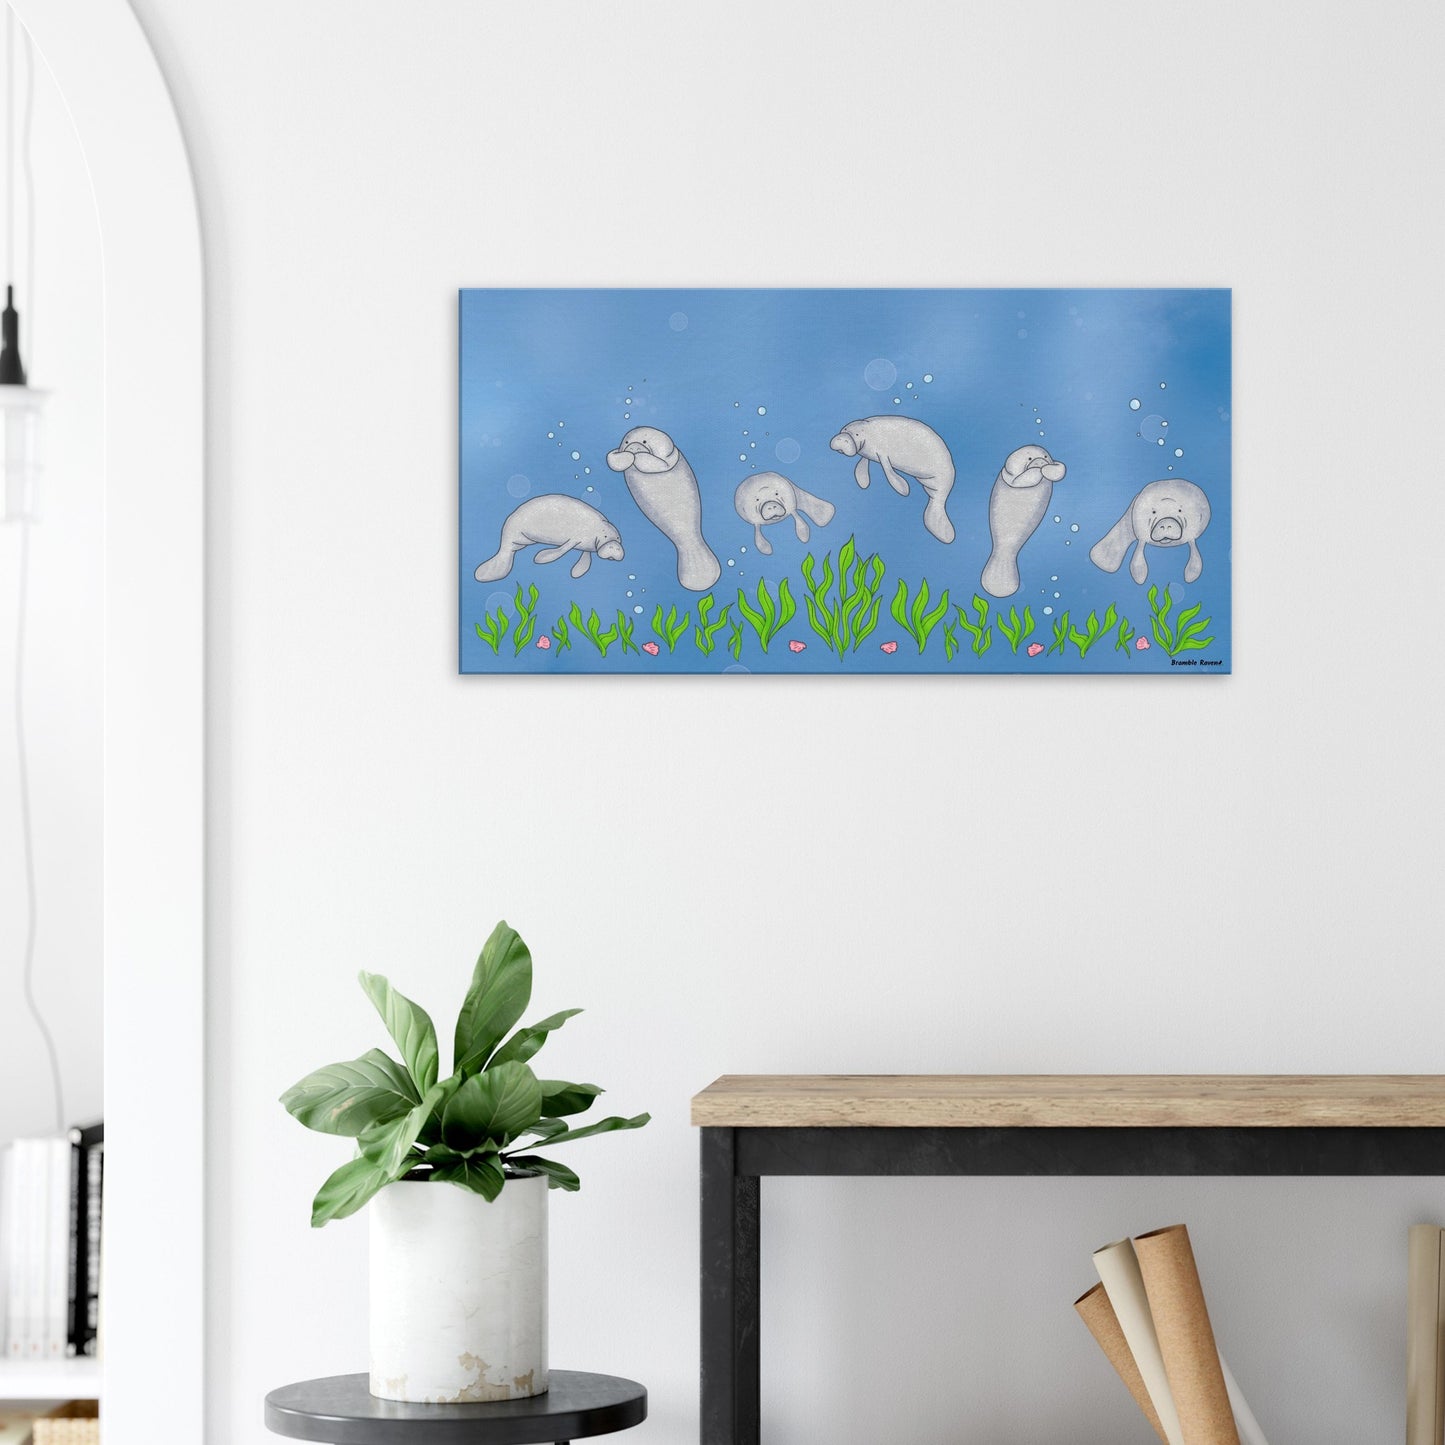 20 by 40 inch slim canvas wall art print featuring cute illustrated manatees swimming above the seabed. Shown on wall above wooden end table and potted plant on stand.